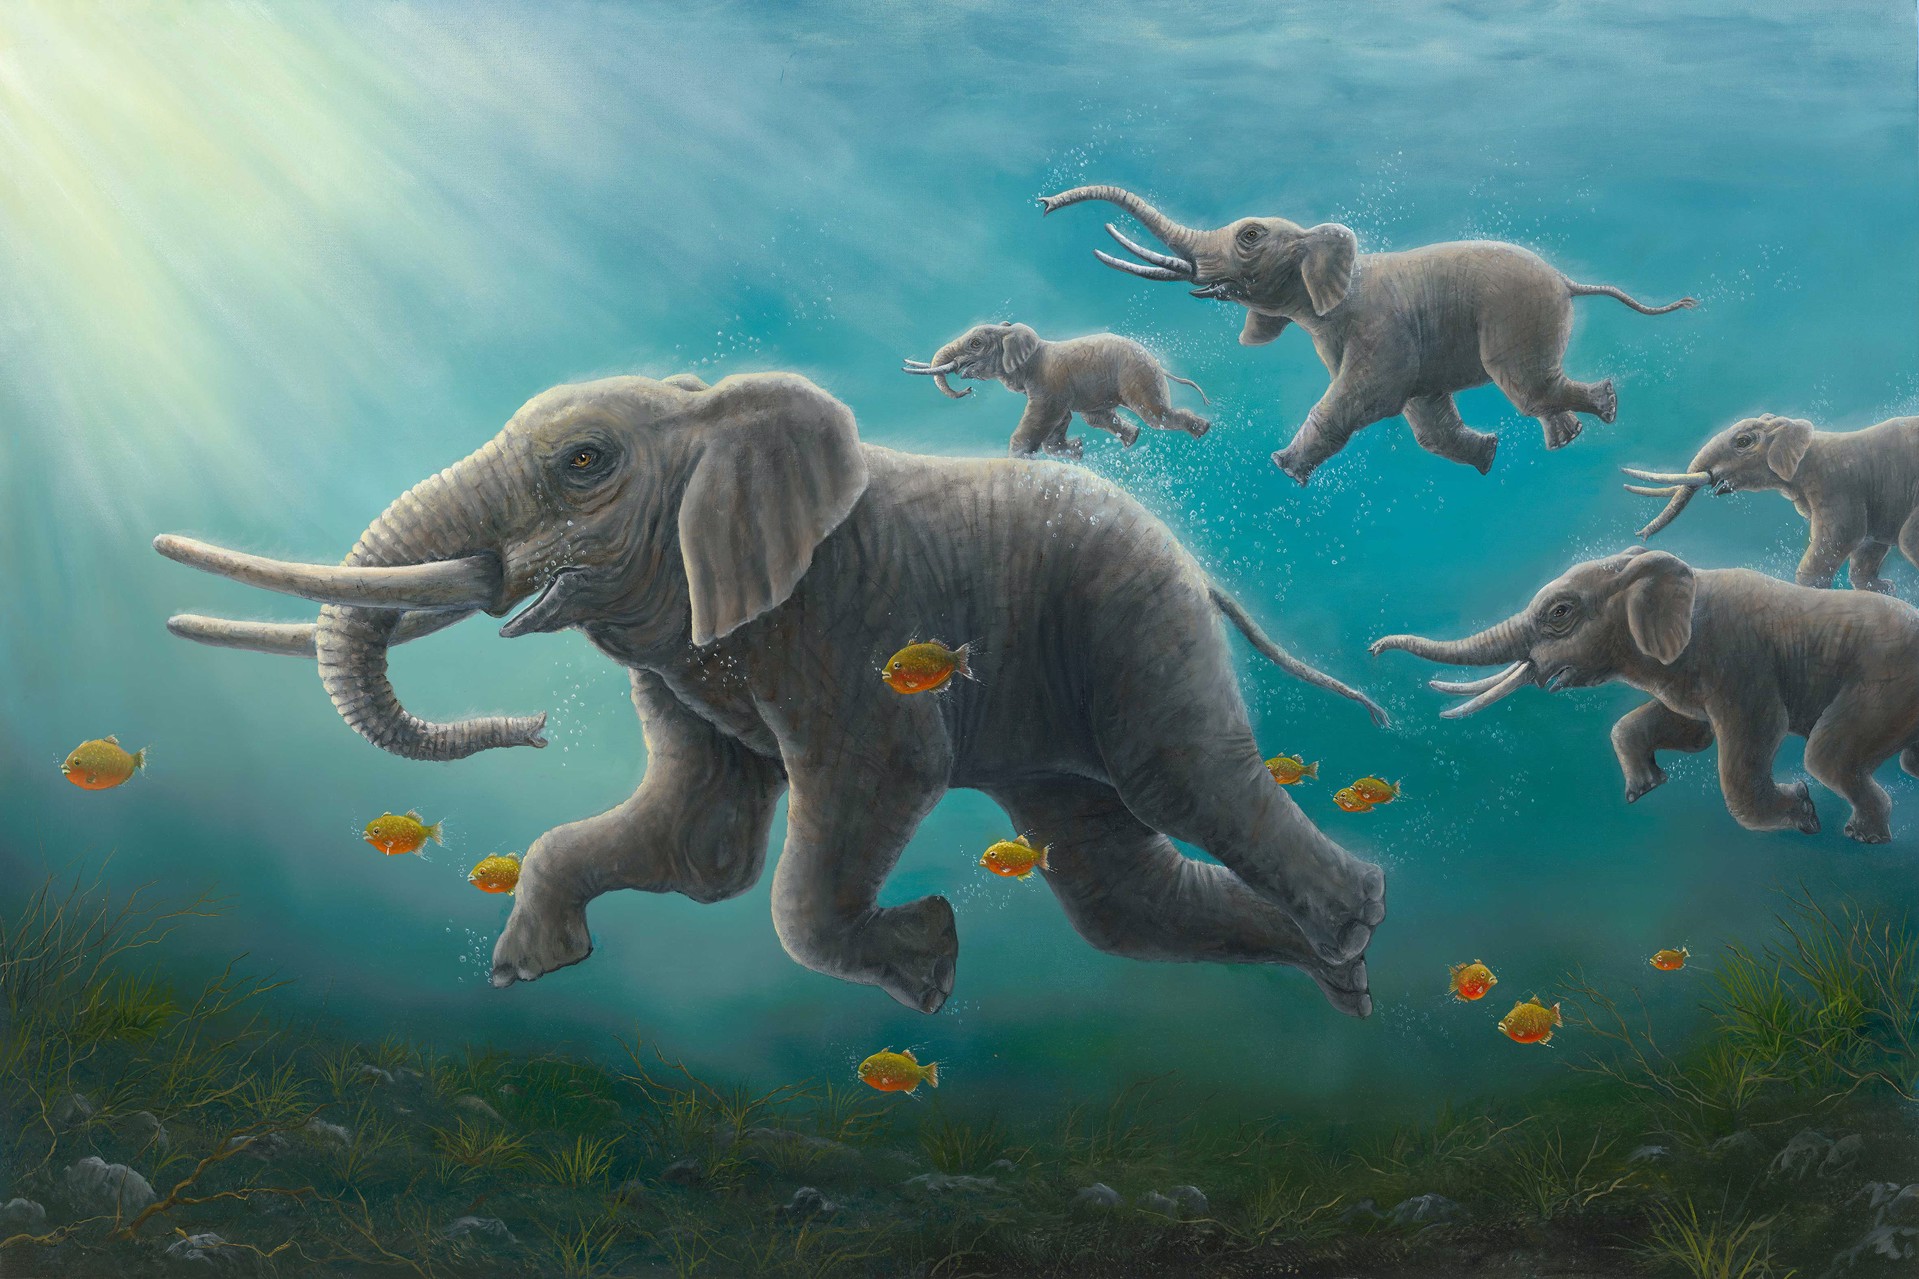 The Race by Robert Bissell